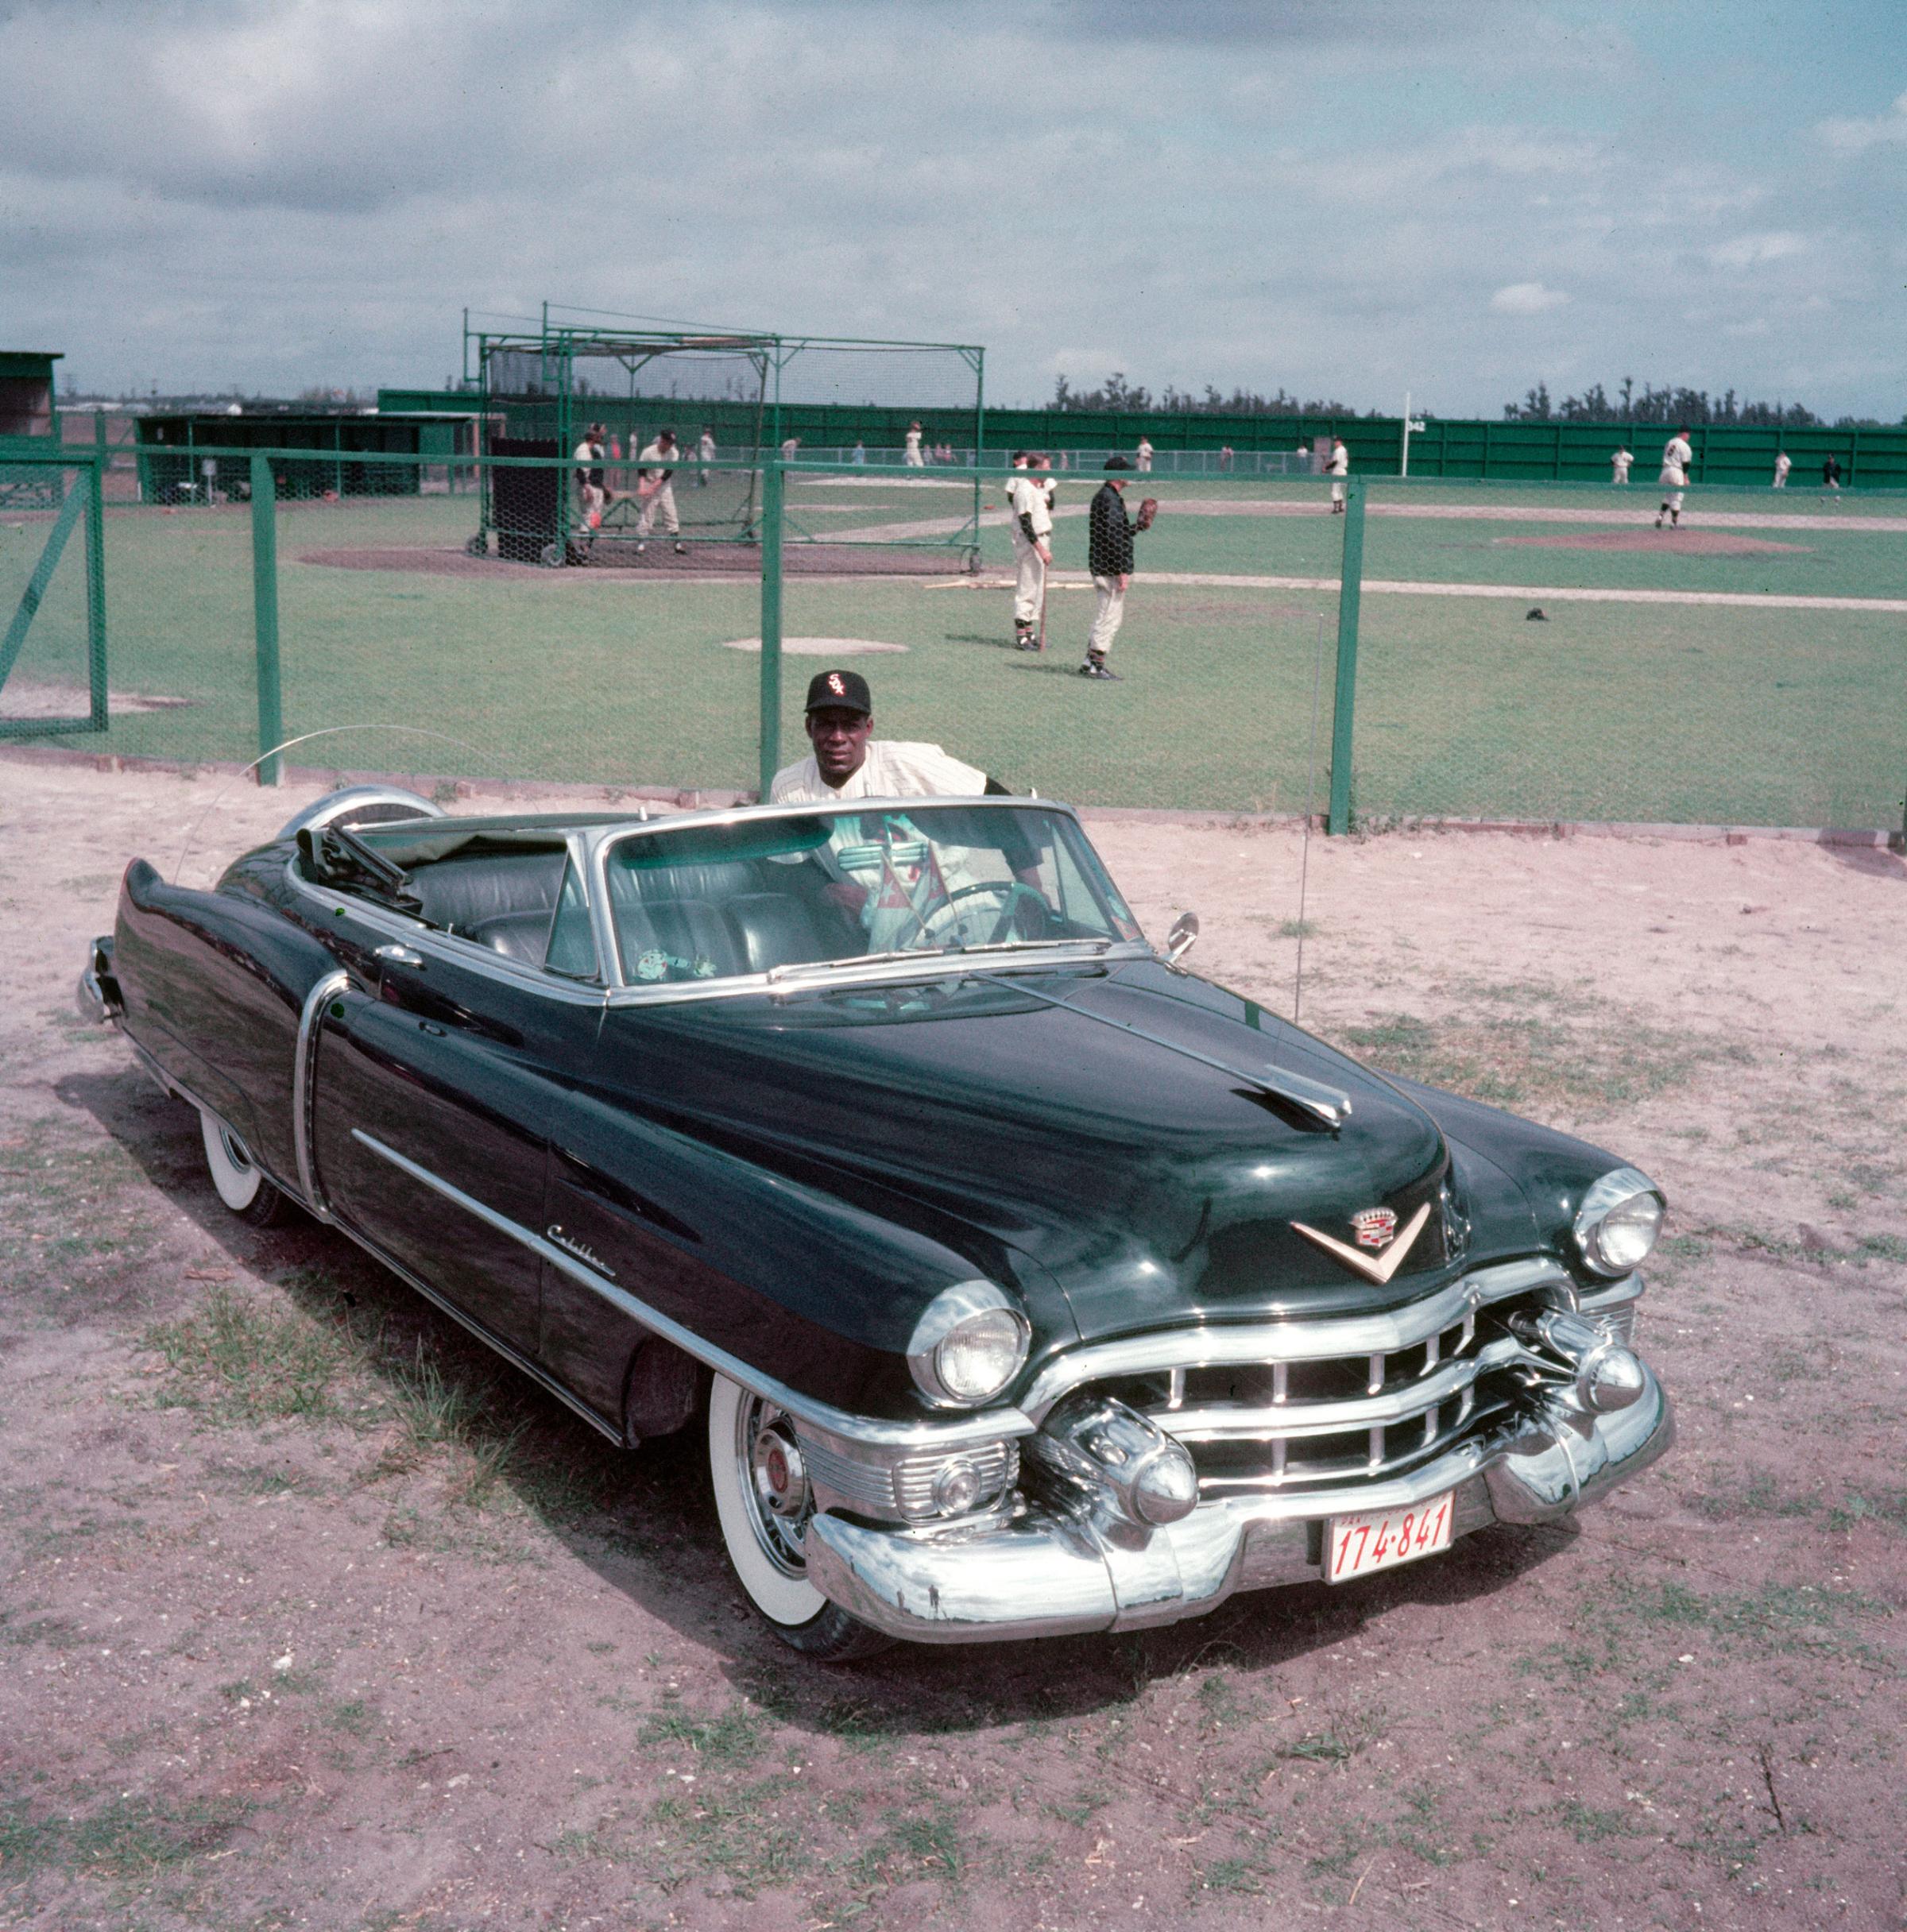 Minnie Minoso posing next to brand new Cadillac convertible during spring training, 1954.